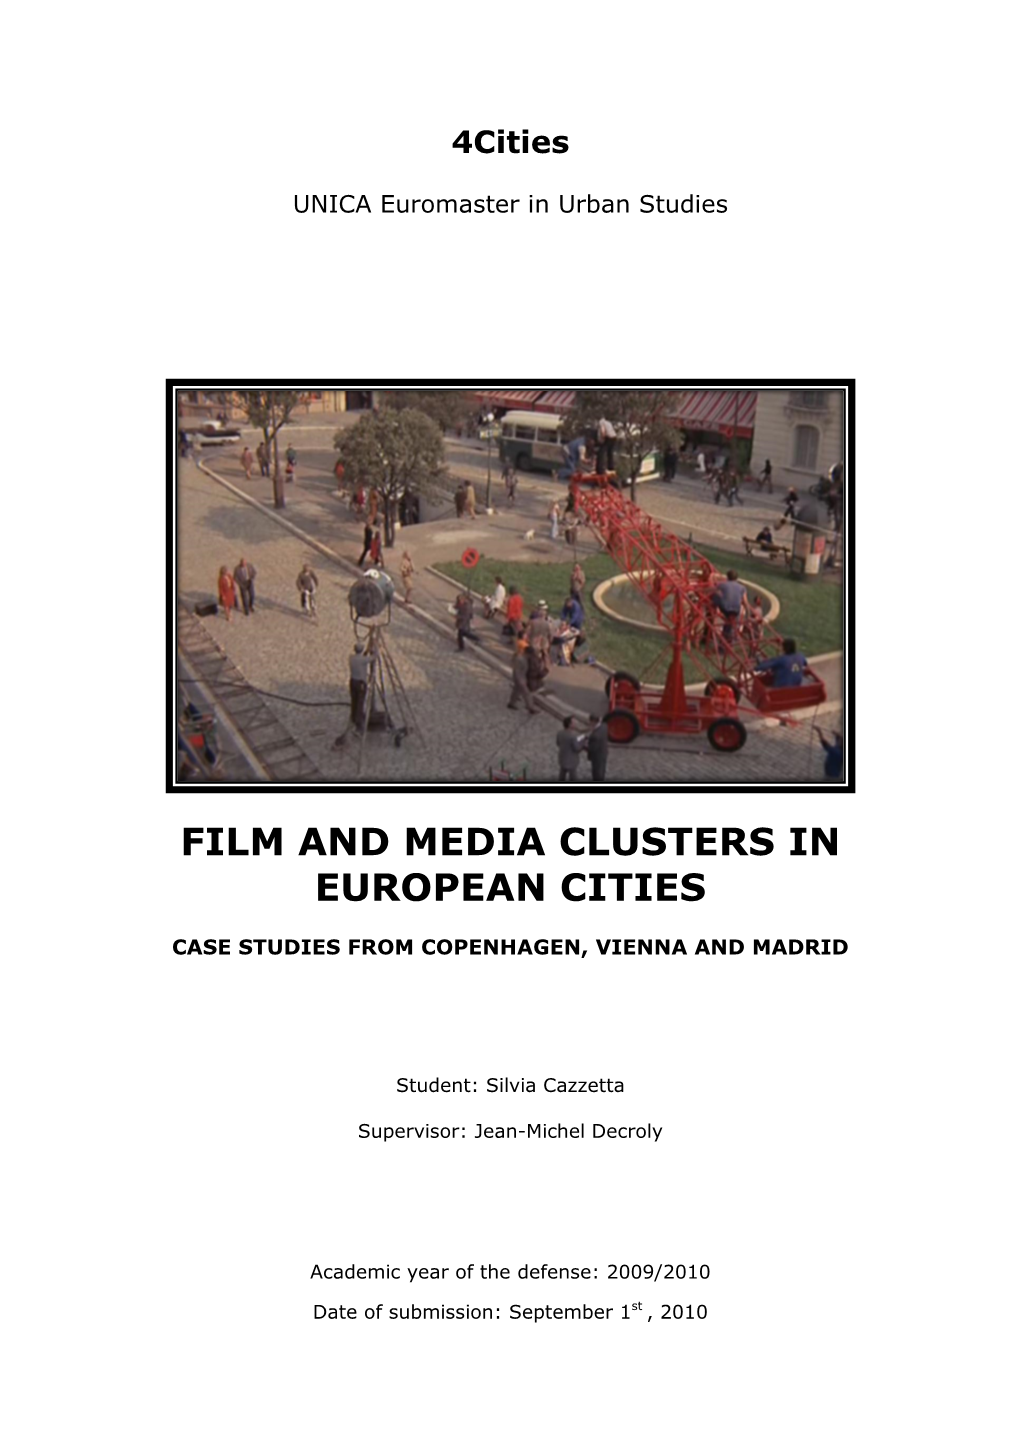 Film and Media Clusters in European Cities